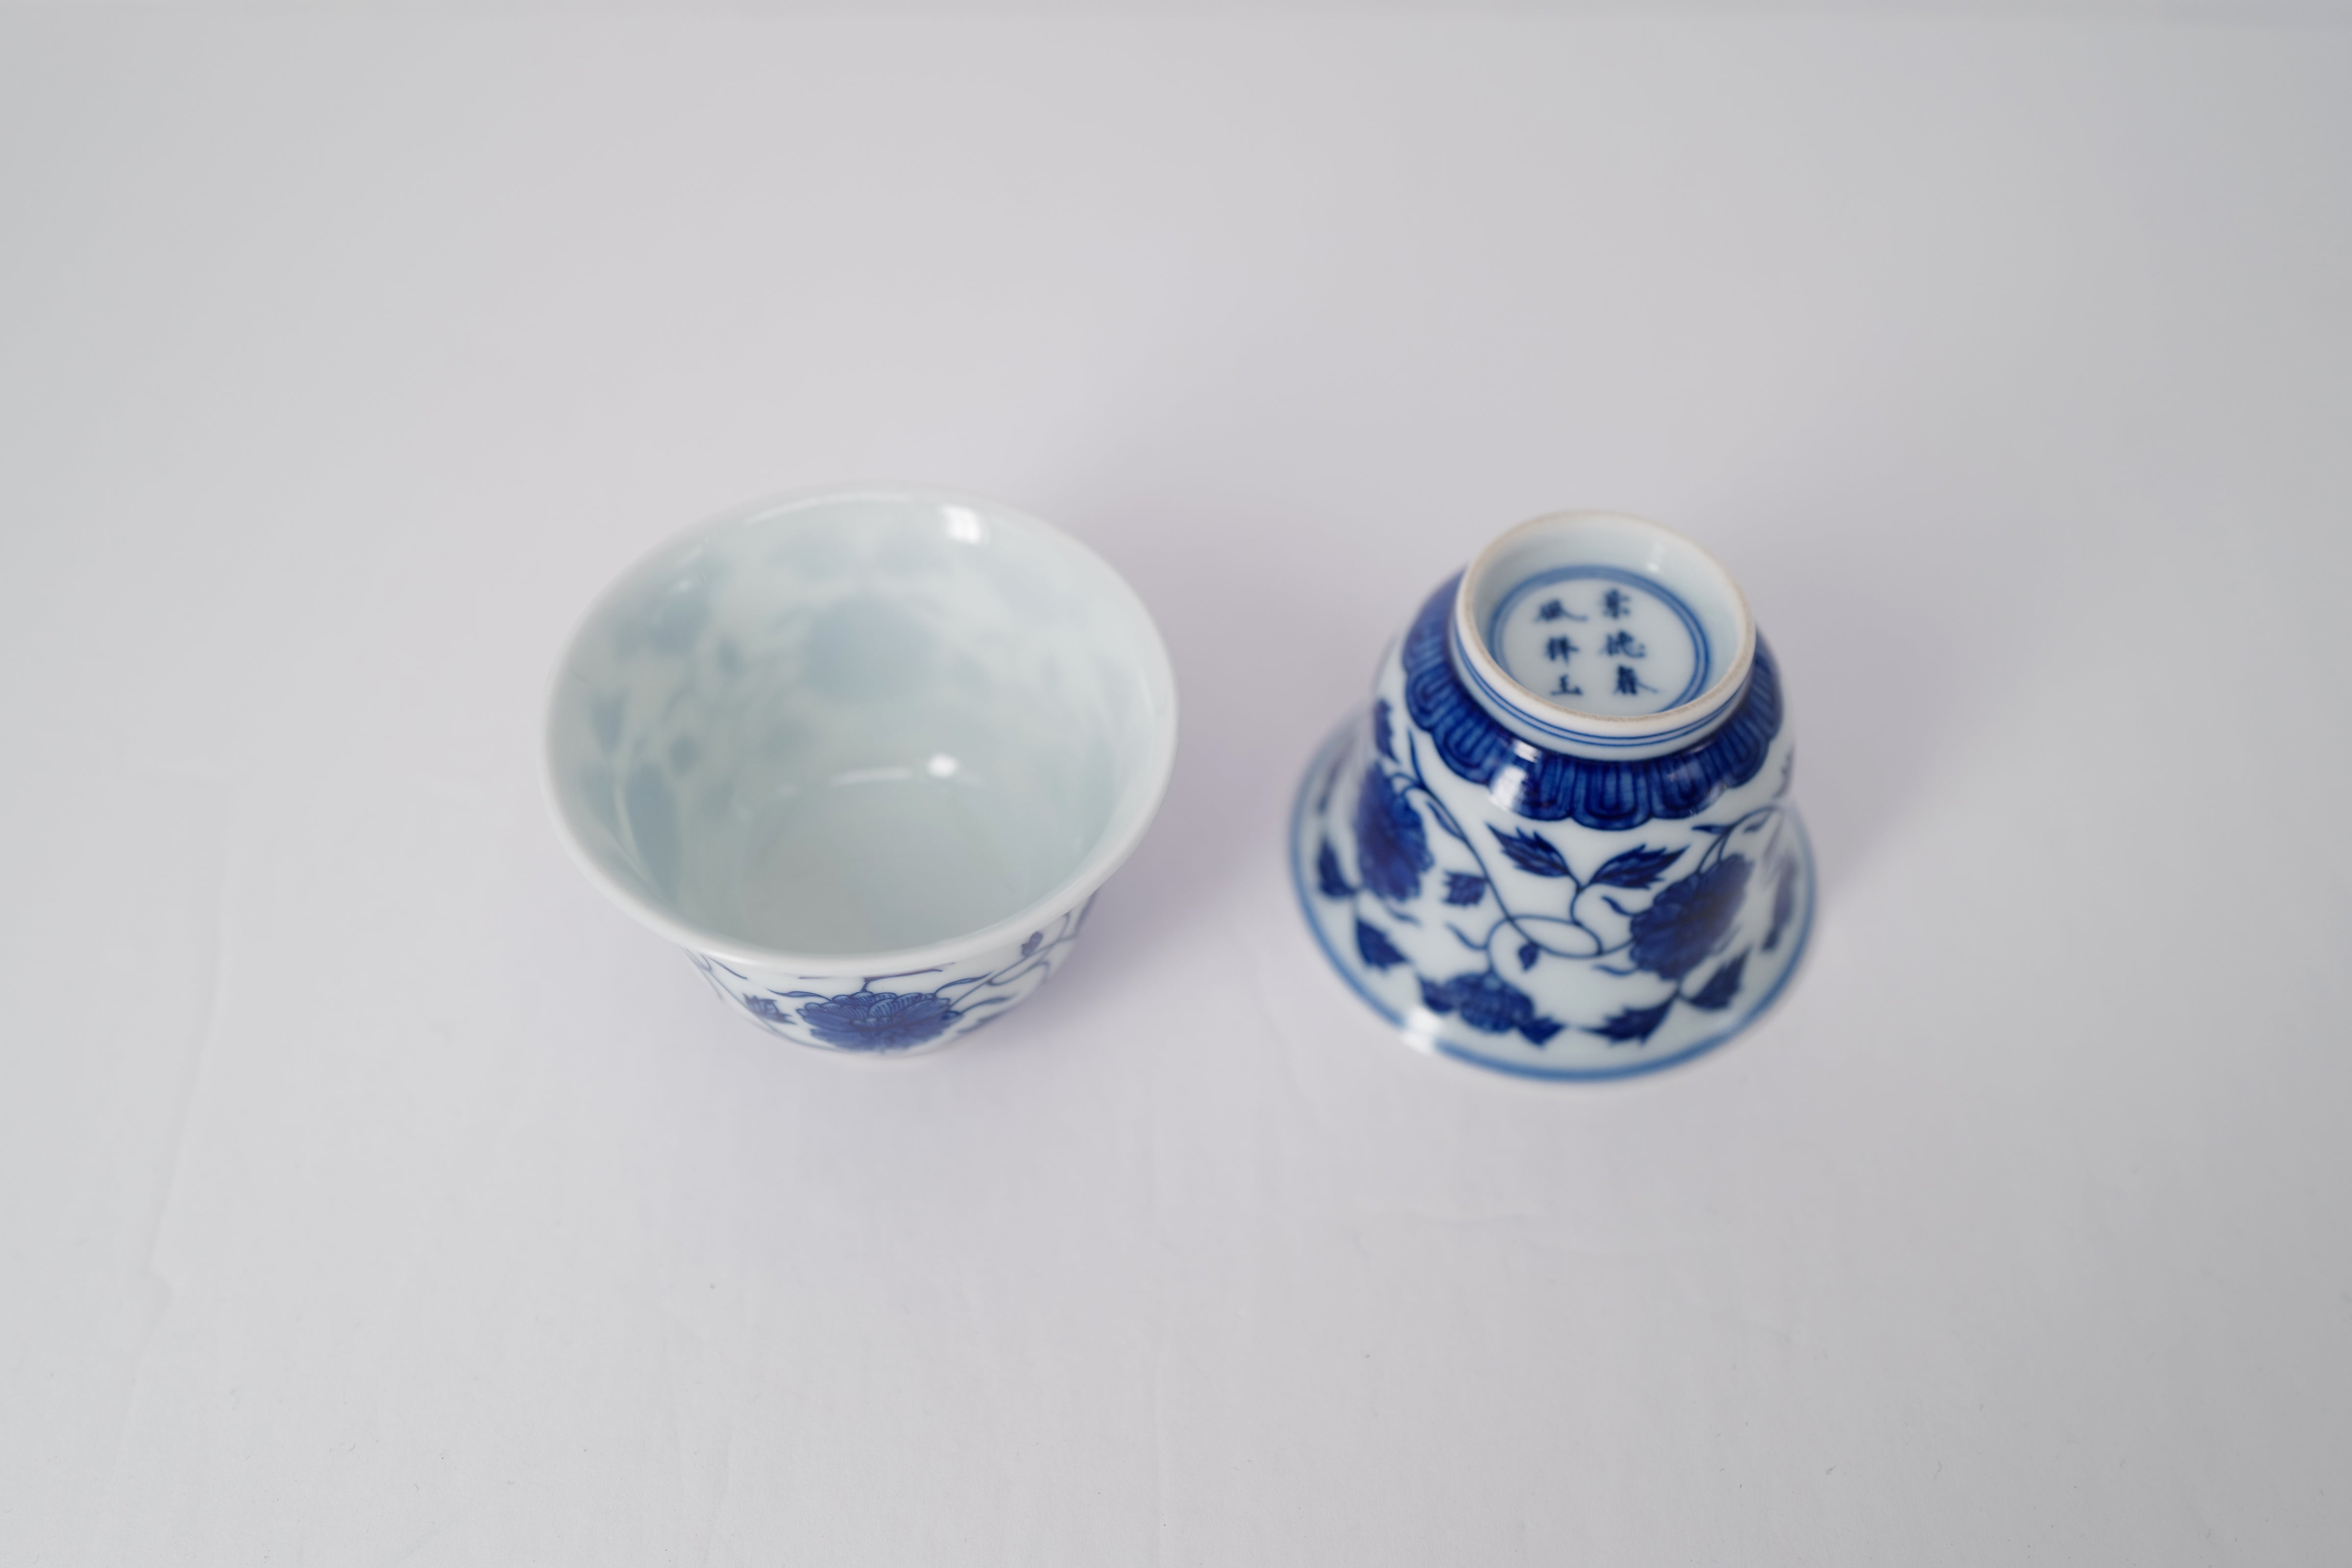 Chunfengxiangyu blue and white small bell cup with interlaced floral design    春风祥玉青花花卉小铃铛杯